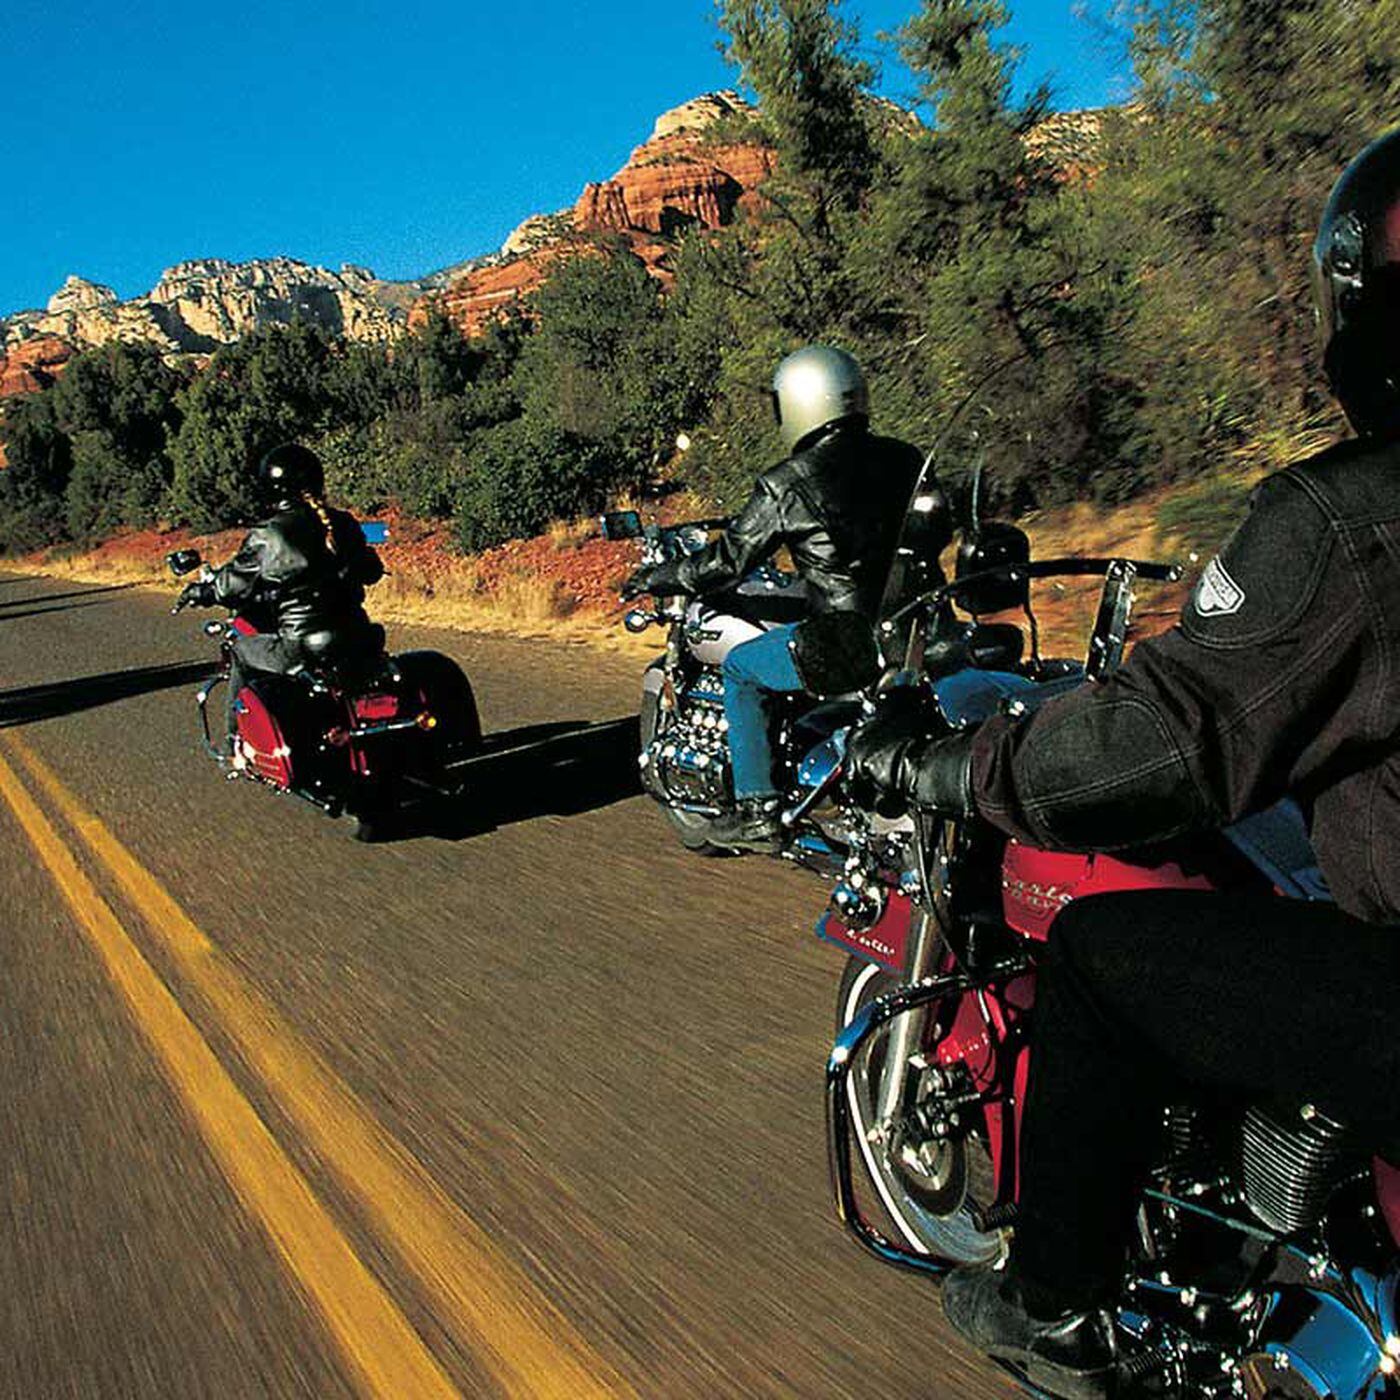 Going The Distance Aboard The Harley Davidson Road King Honda Valkyrie Tourer And Kawasaki Nomad Motorcycle Cruiser